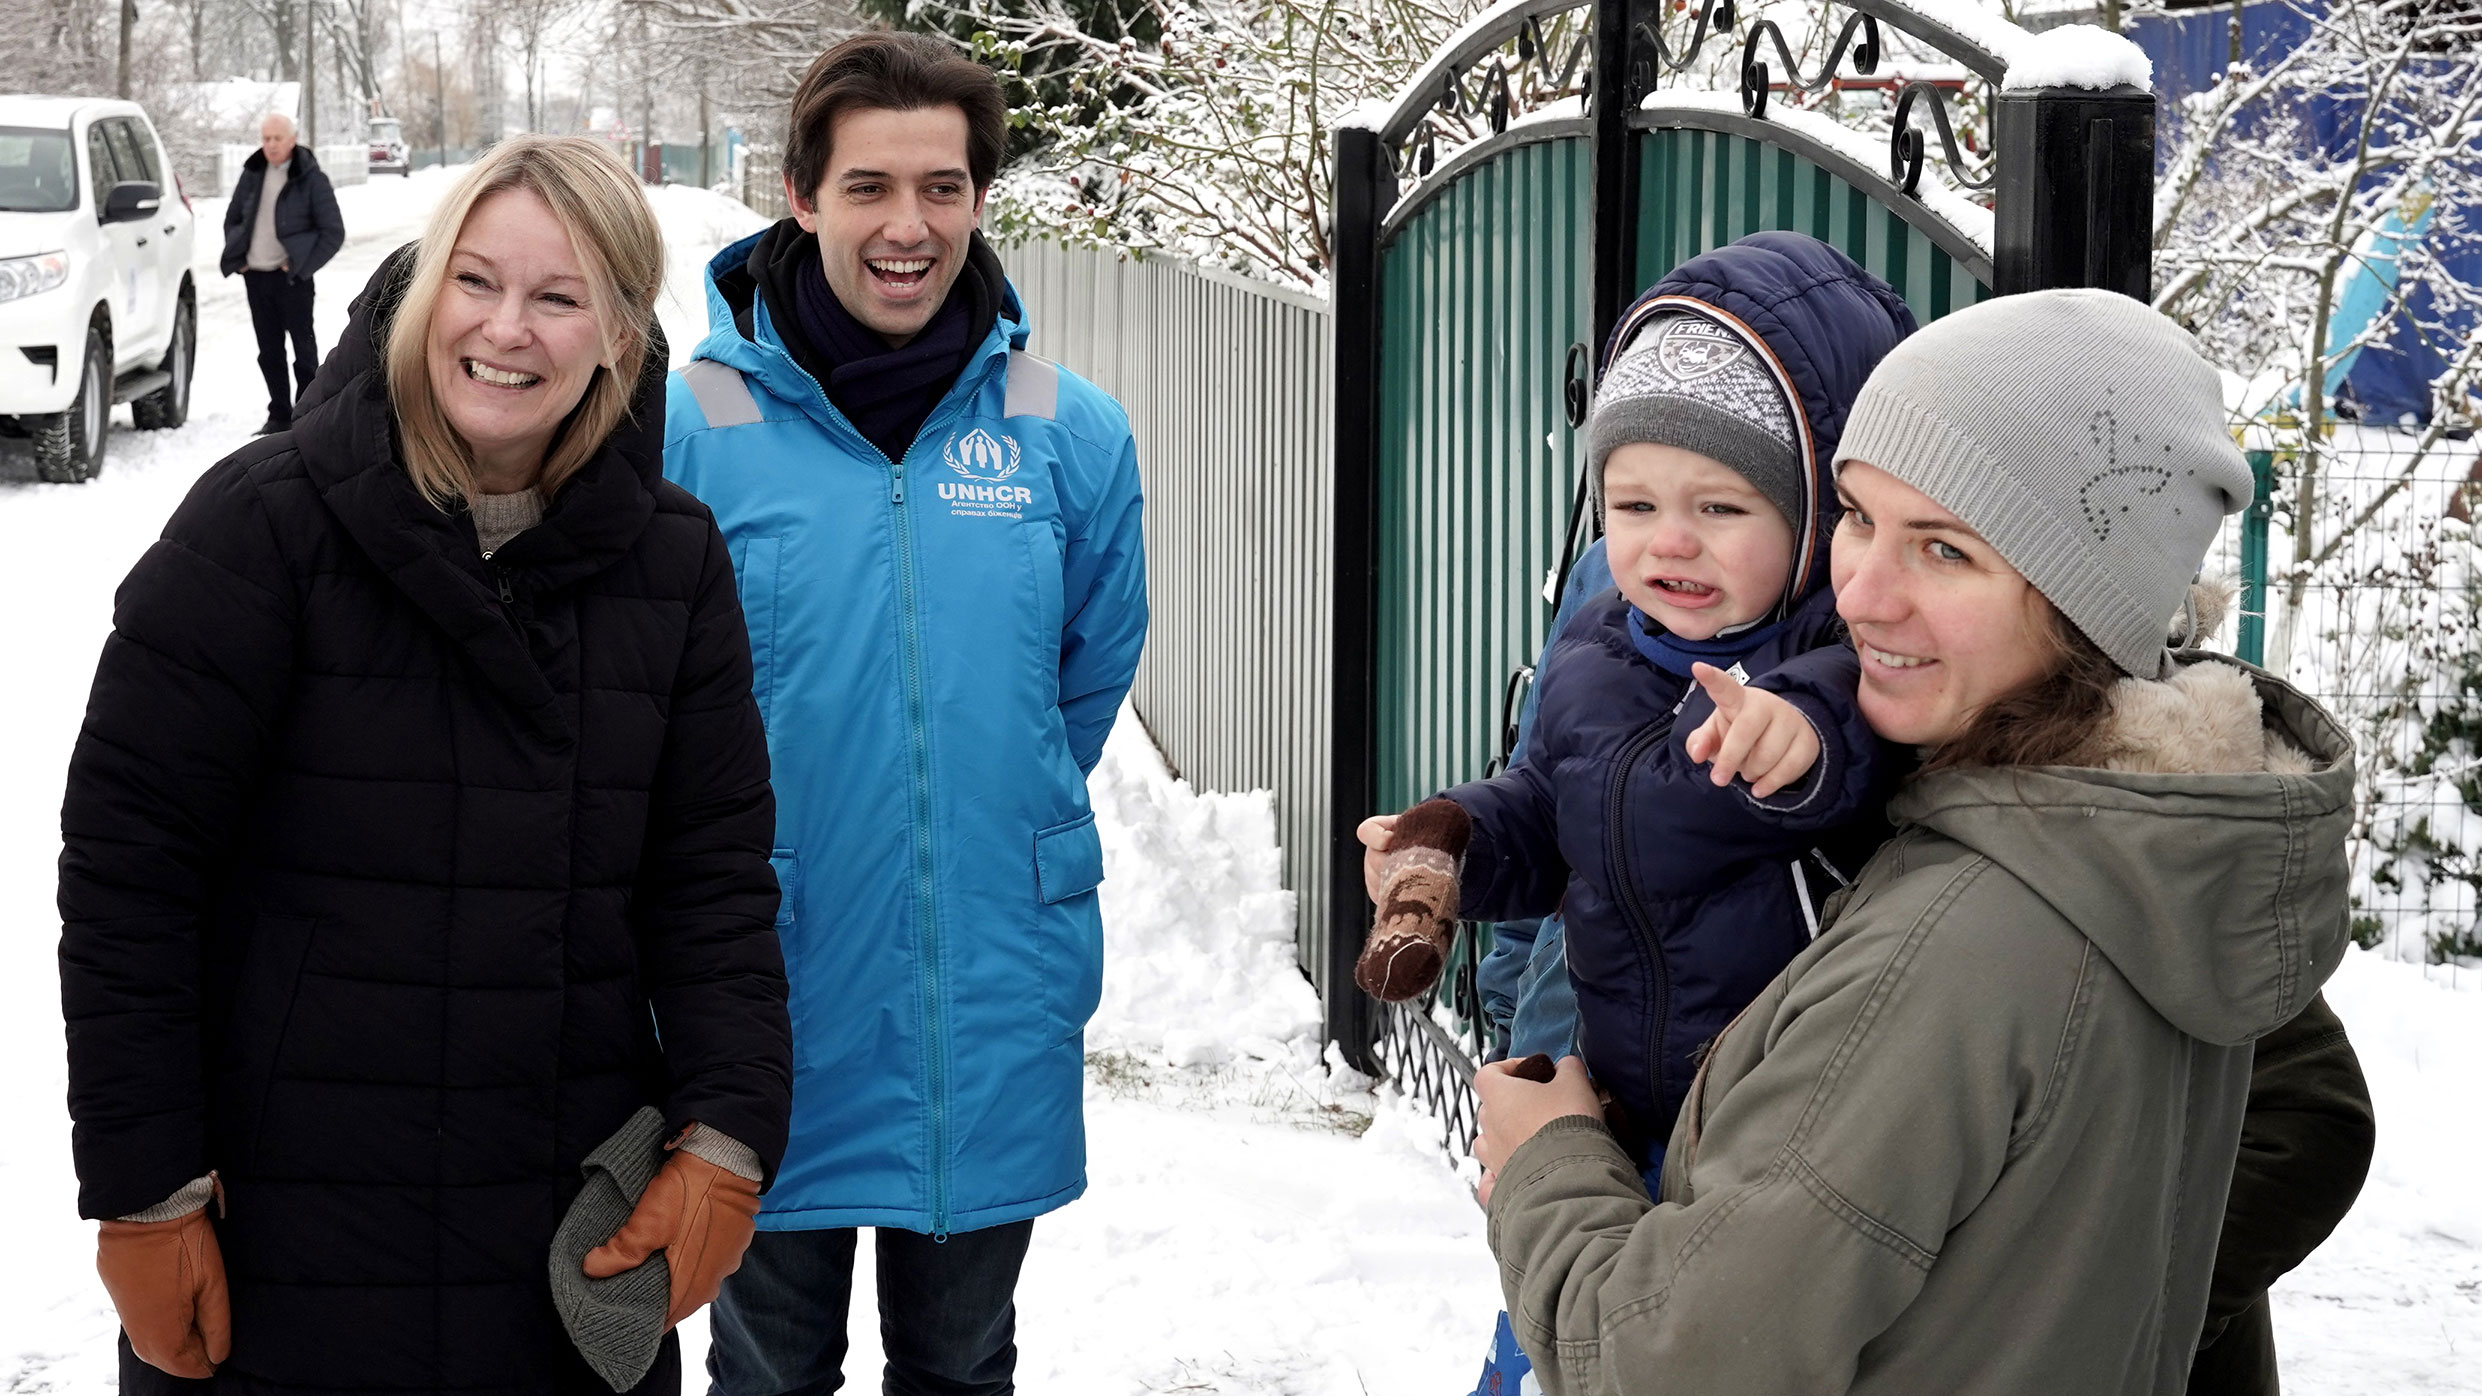 Karolina stands in the snowy outdoors next to a woman carrying a child and a young man in a blue UNHCR vest